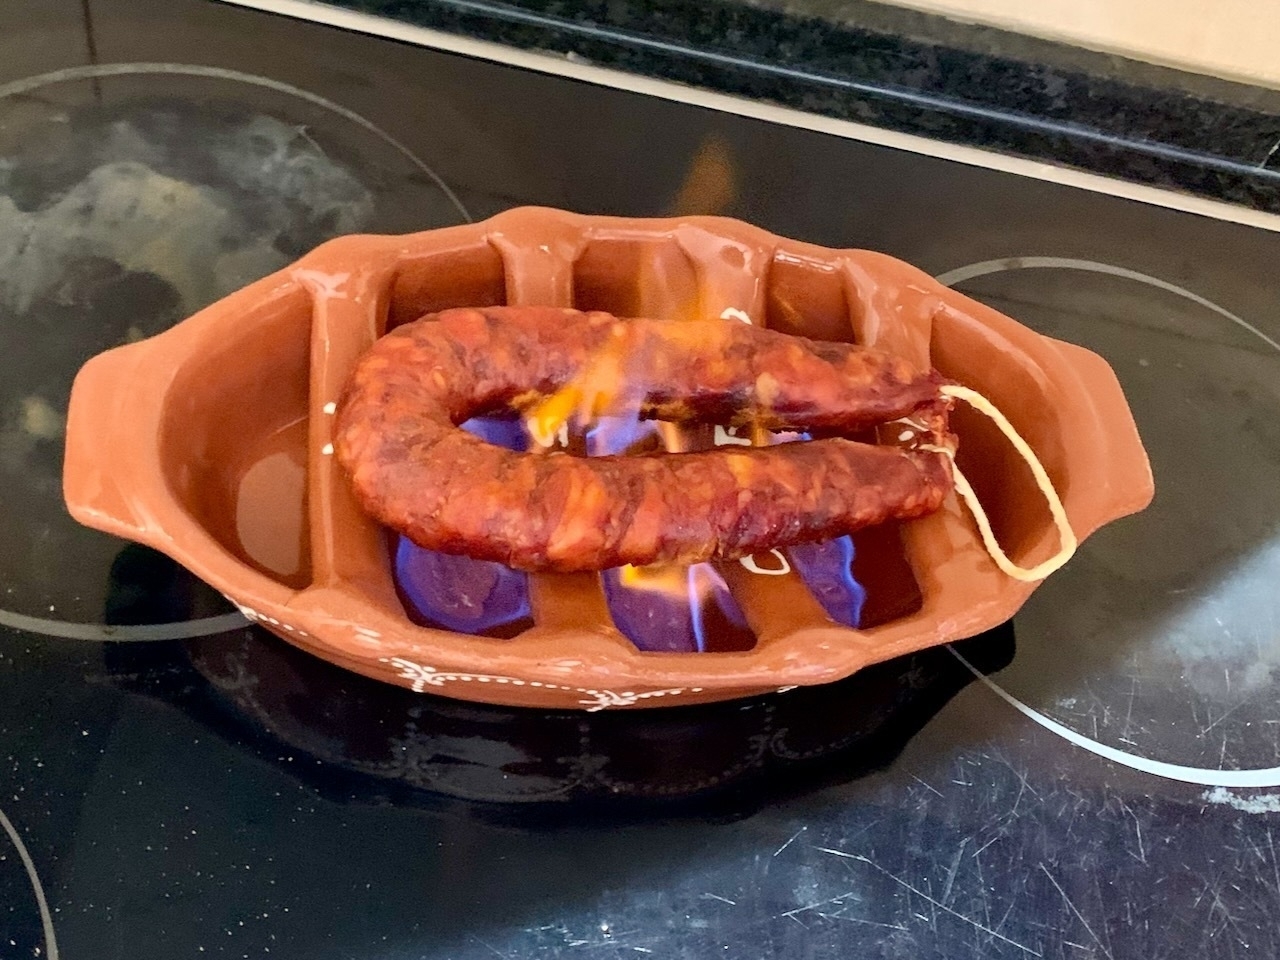 An 'assador', a Portuguese ceramic dish with bars across it, filled with lighter fluid gel that's been set alight, grilling a chouriço Portuguese sausage.